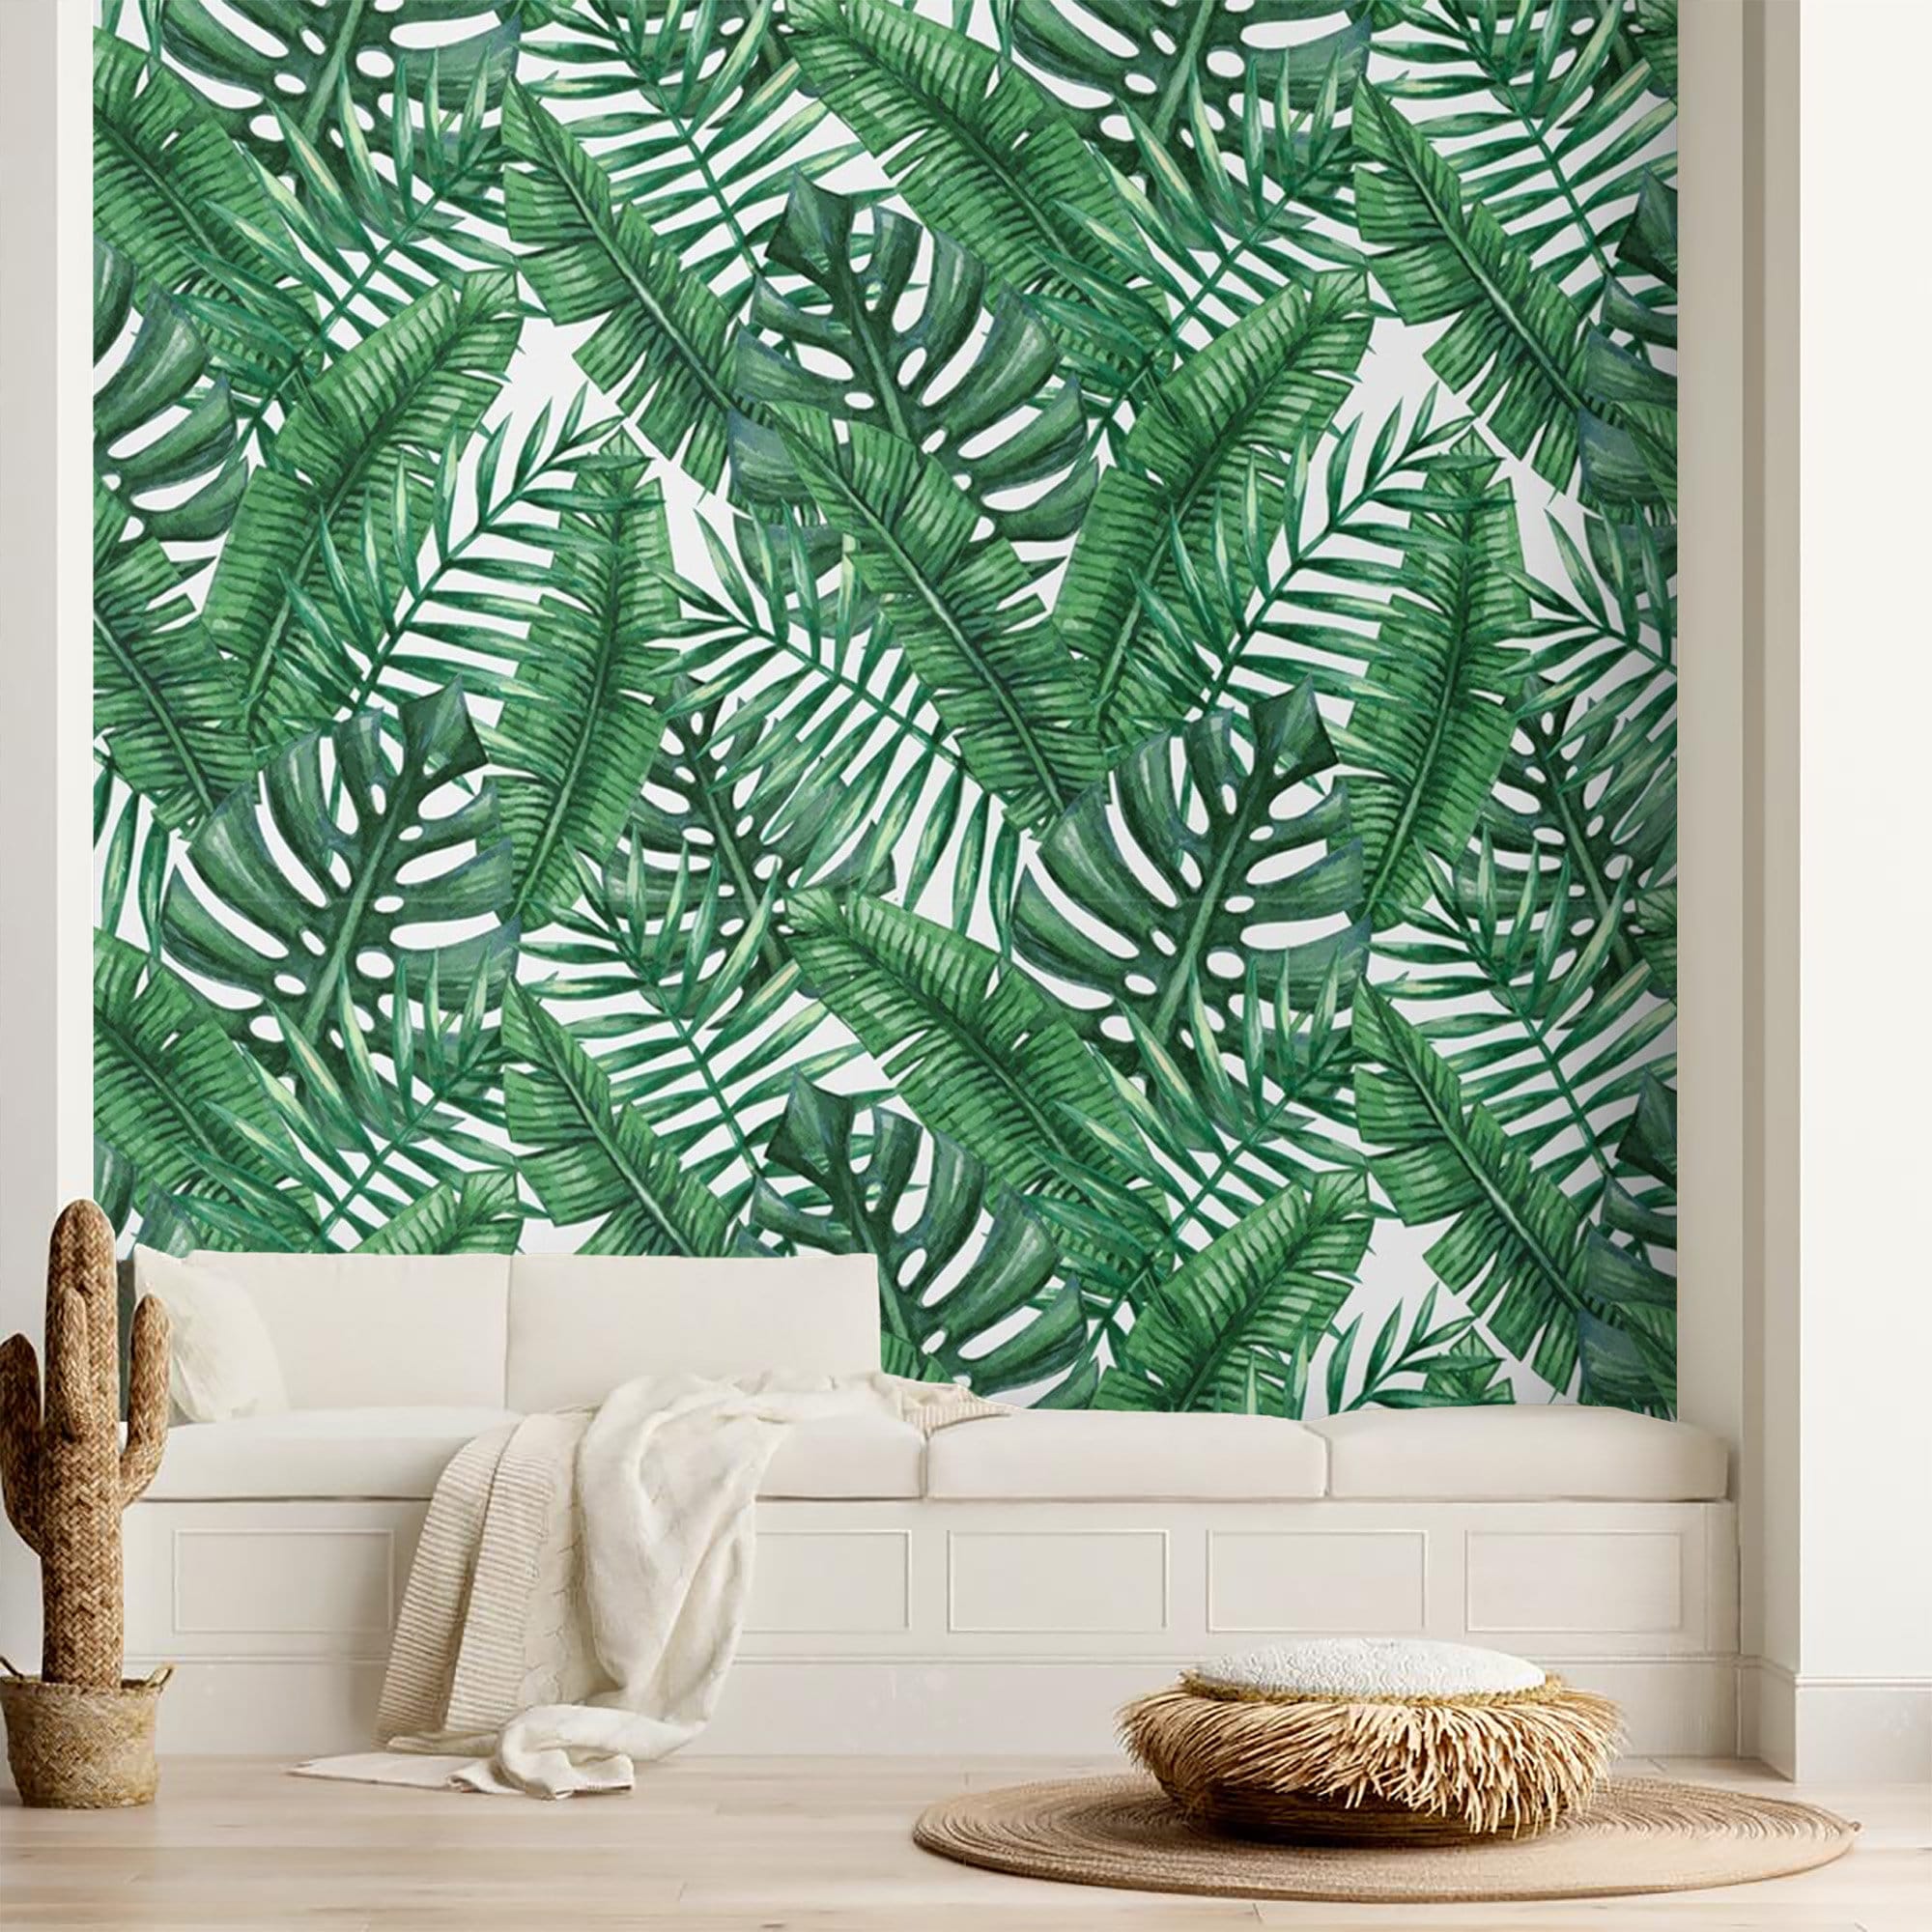 Tropical Wallpaper Peel and Stick Palm Leaves Removable | Etsy